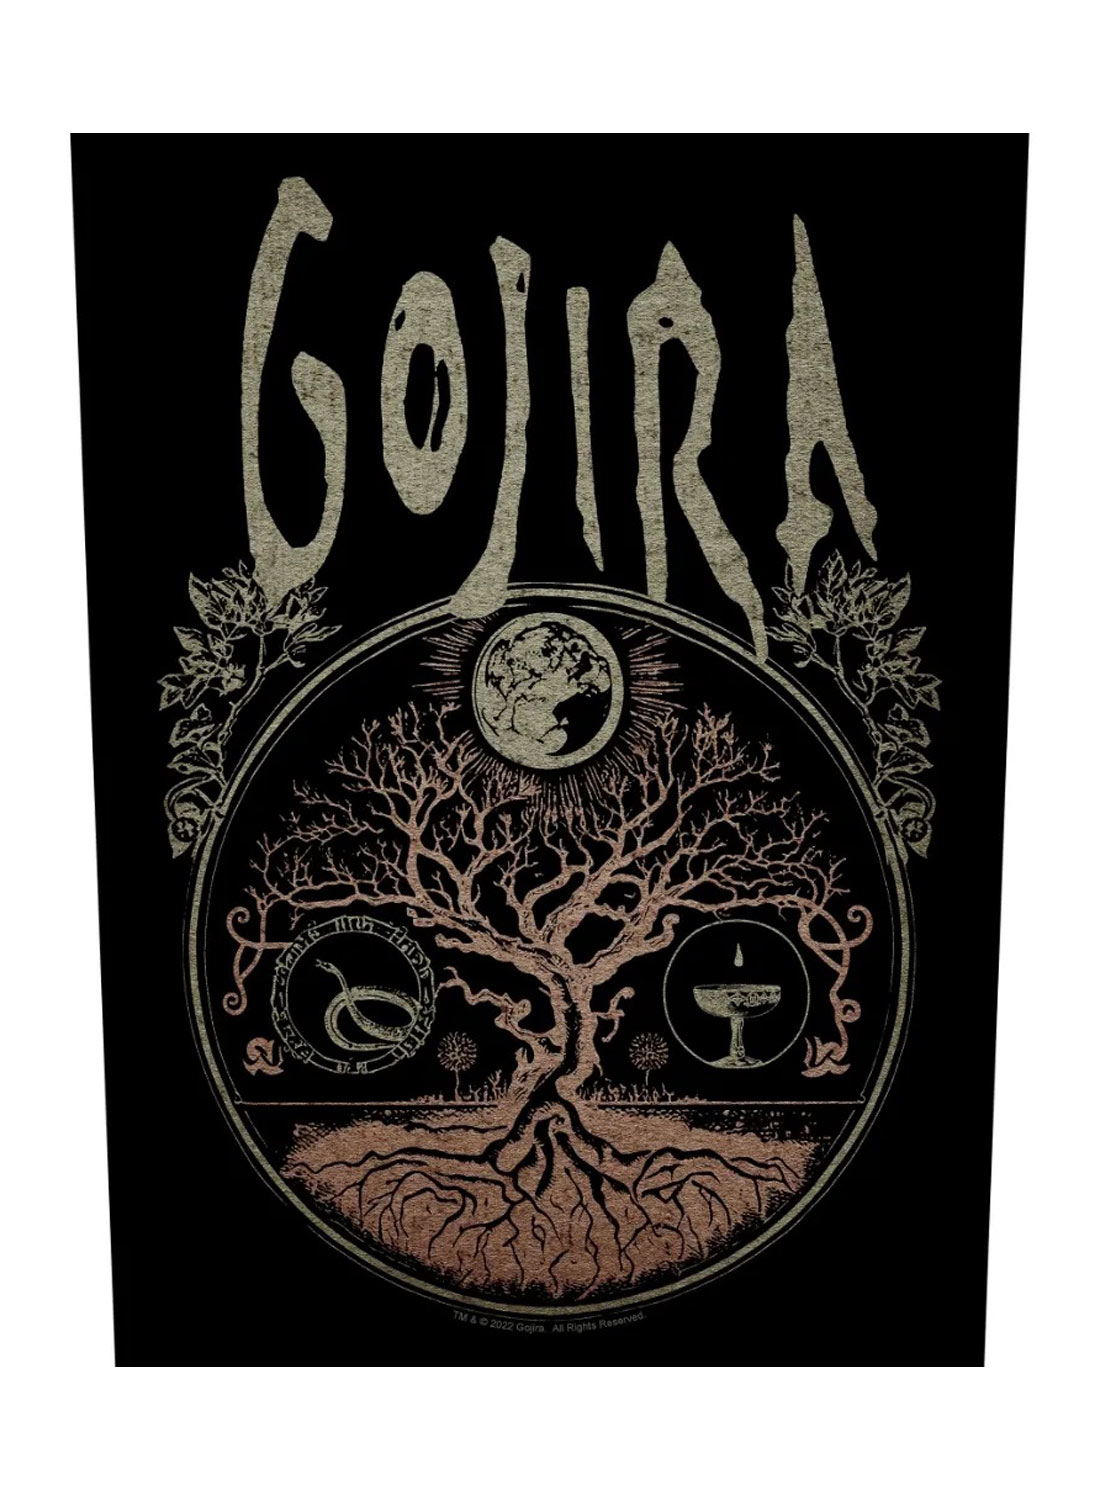 Gojira Tree Of Life Back Patch